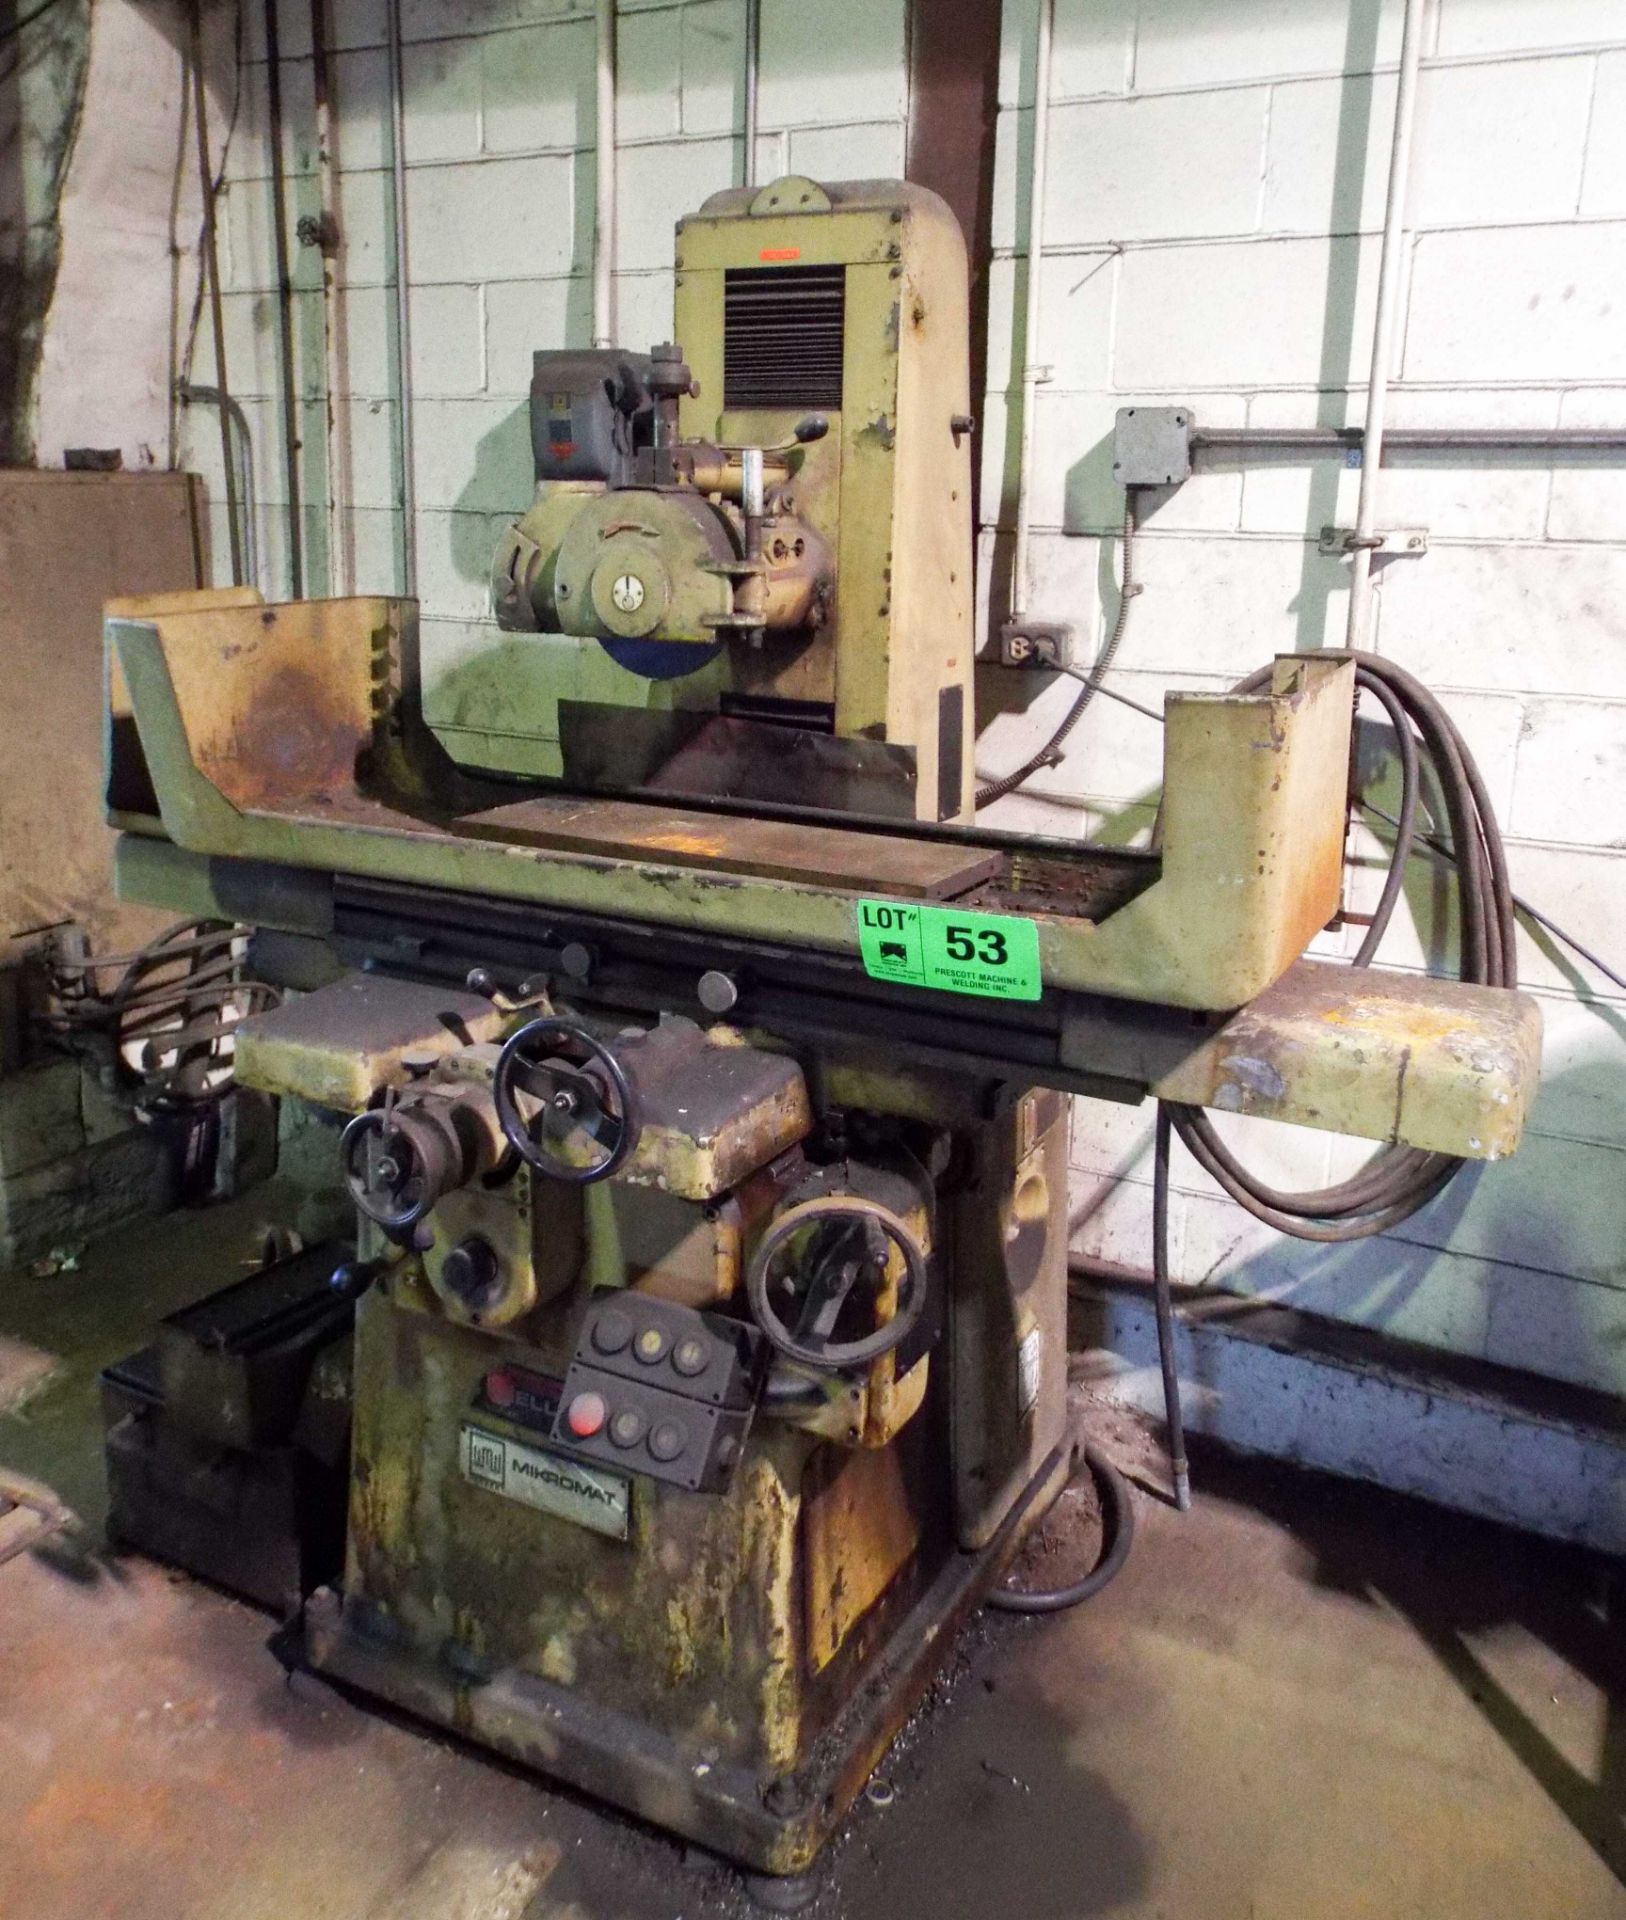 HECKERT SKW200X600 HYDRAULIC SURFACE GRINDER WITH ECLIPSE 8"X23.75" MAGNETIC CHUCK, S/N: N/A (CI) [